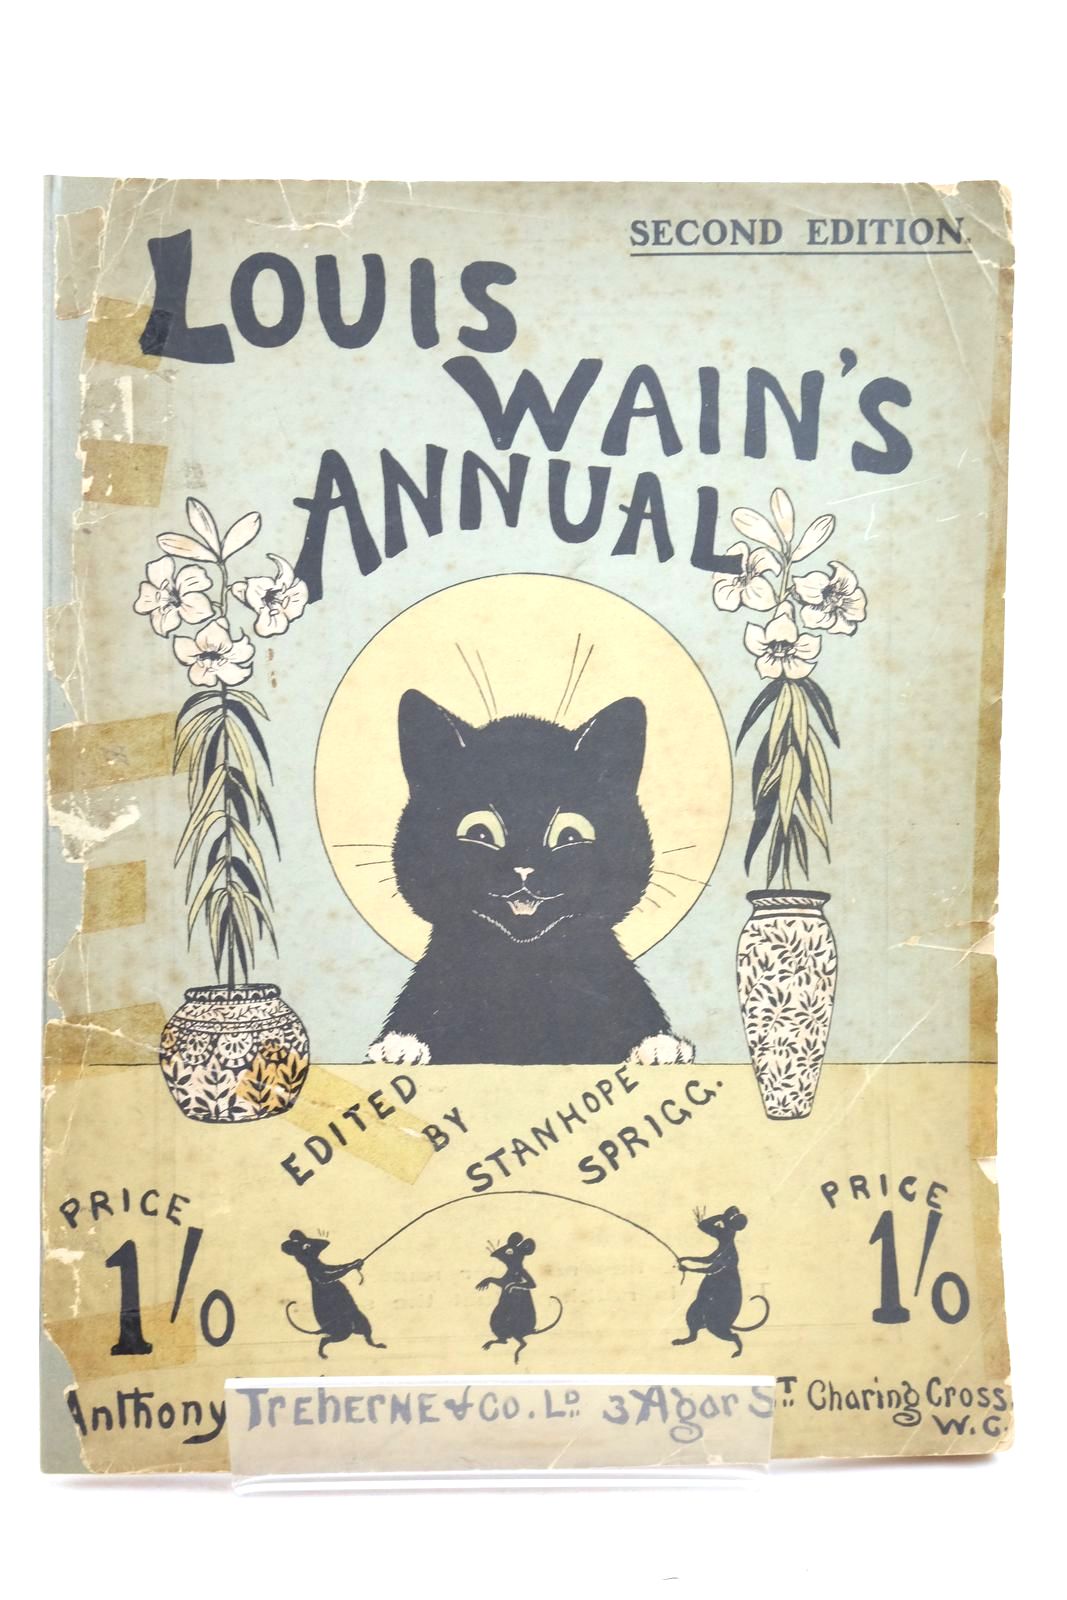 Photo of LOUIS WAIN'S ANNUAL illustrated by Wain, Louis published by Anthony Treherne & Co. Ltd. (STOCK CODE: 2138094)  for sale by Stella & Rose's Books